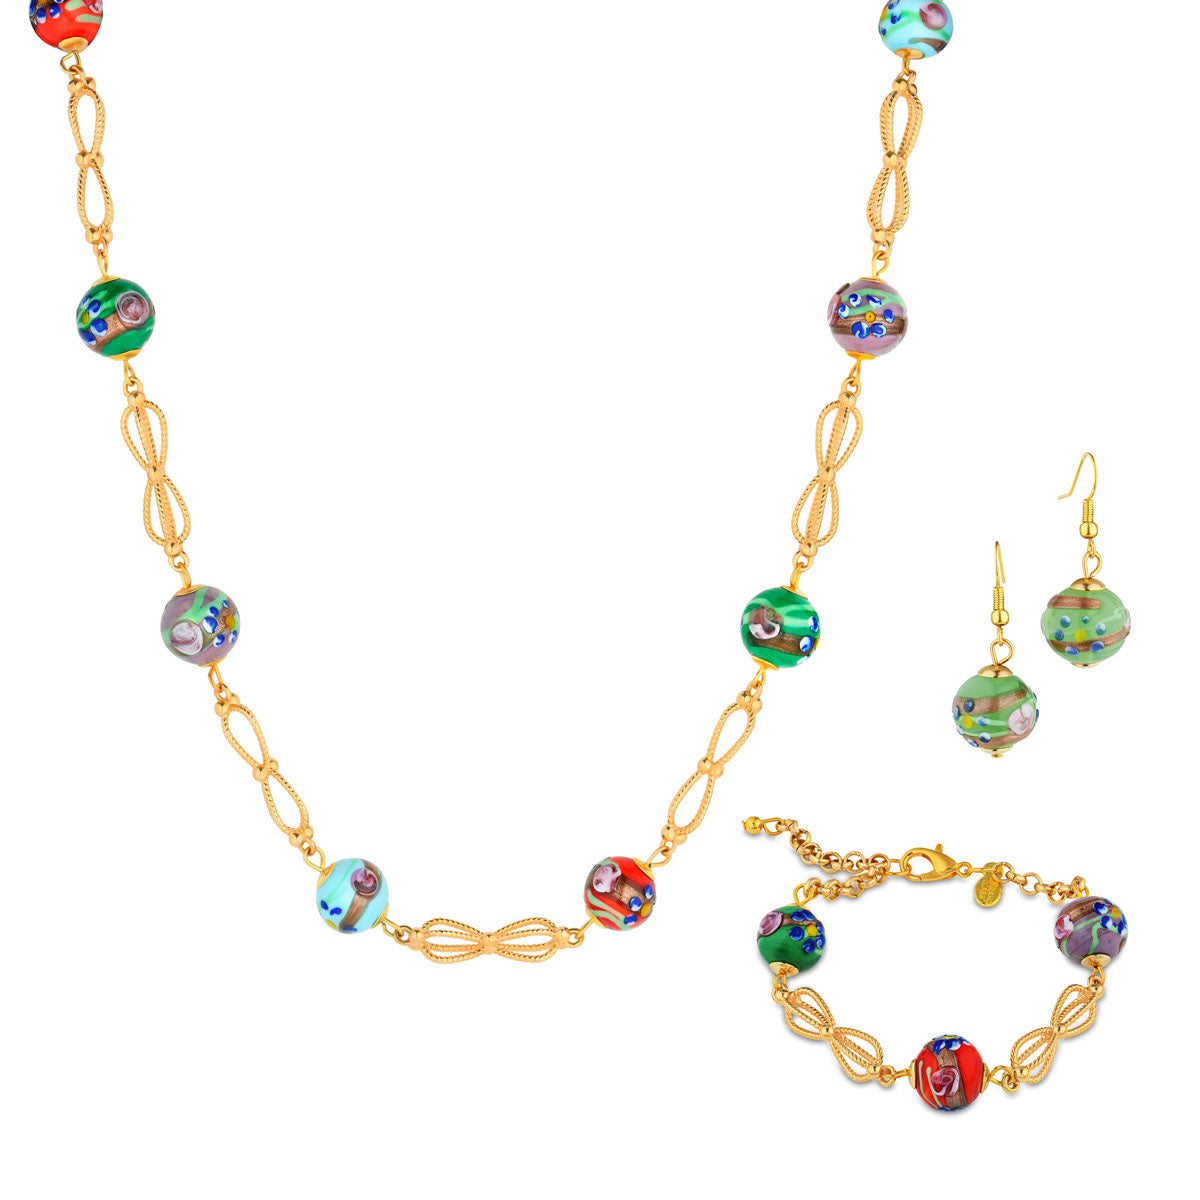 Francesca Murano Glass Necklace, Bracelet and Earring